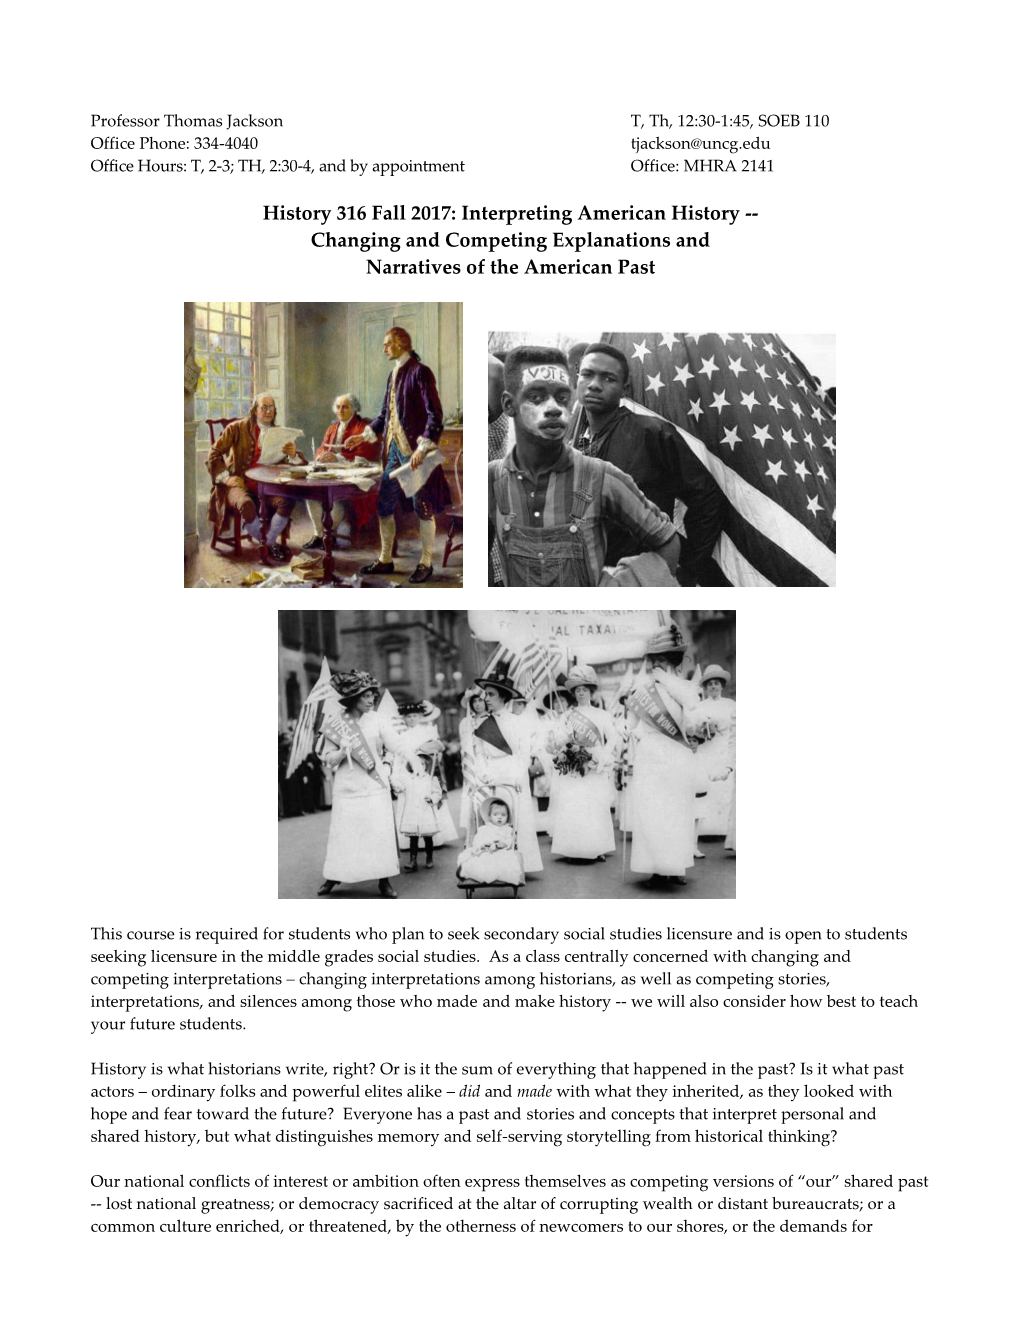 History 316 Fall 2017: Interpreting American History -- Changing and Competing Explanations and Narratives of the American Past